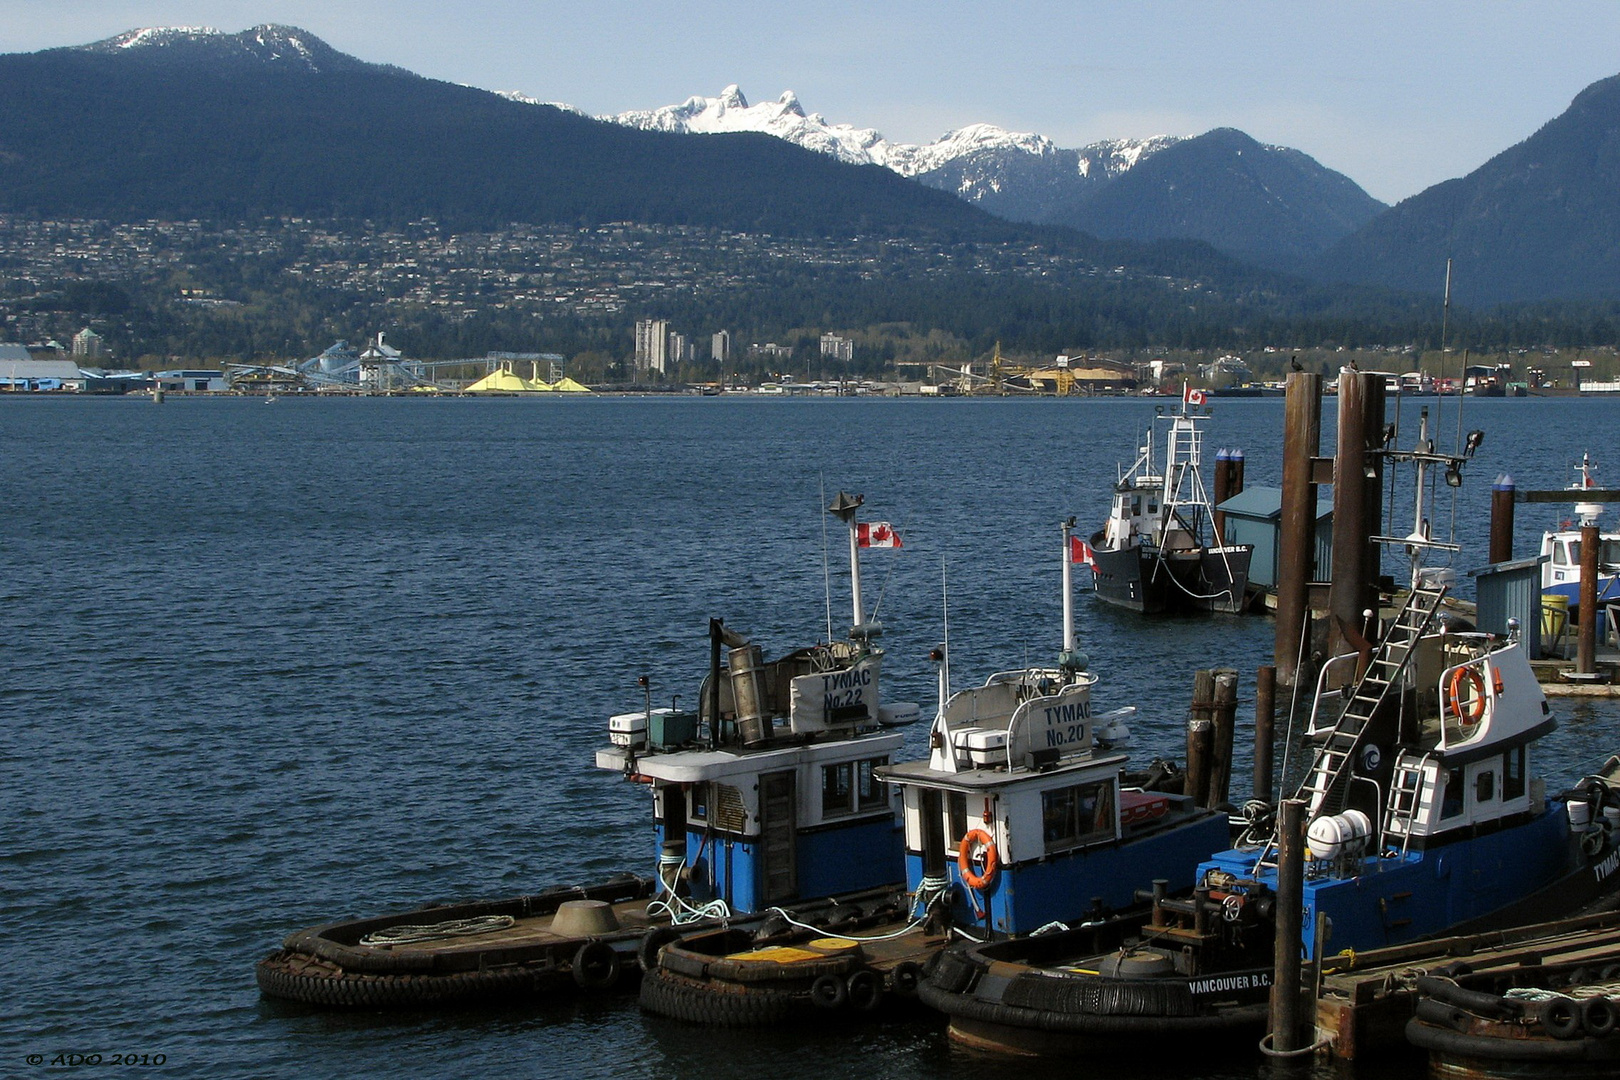 Tugboats in Vancouver's Harbour